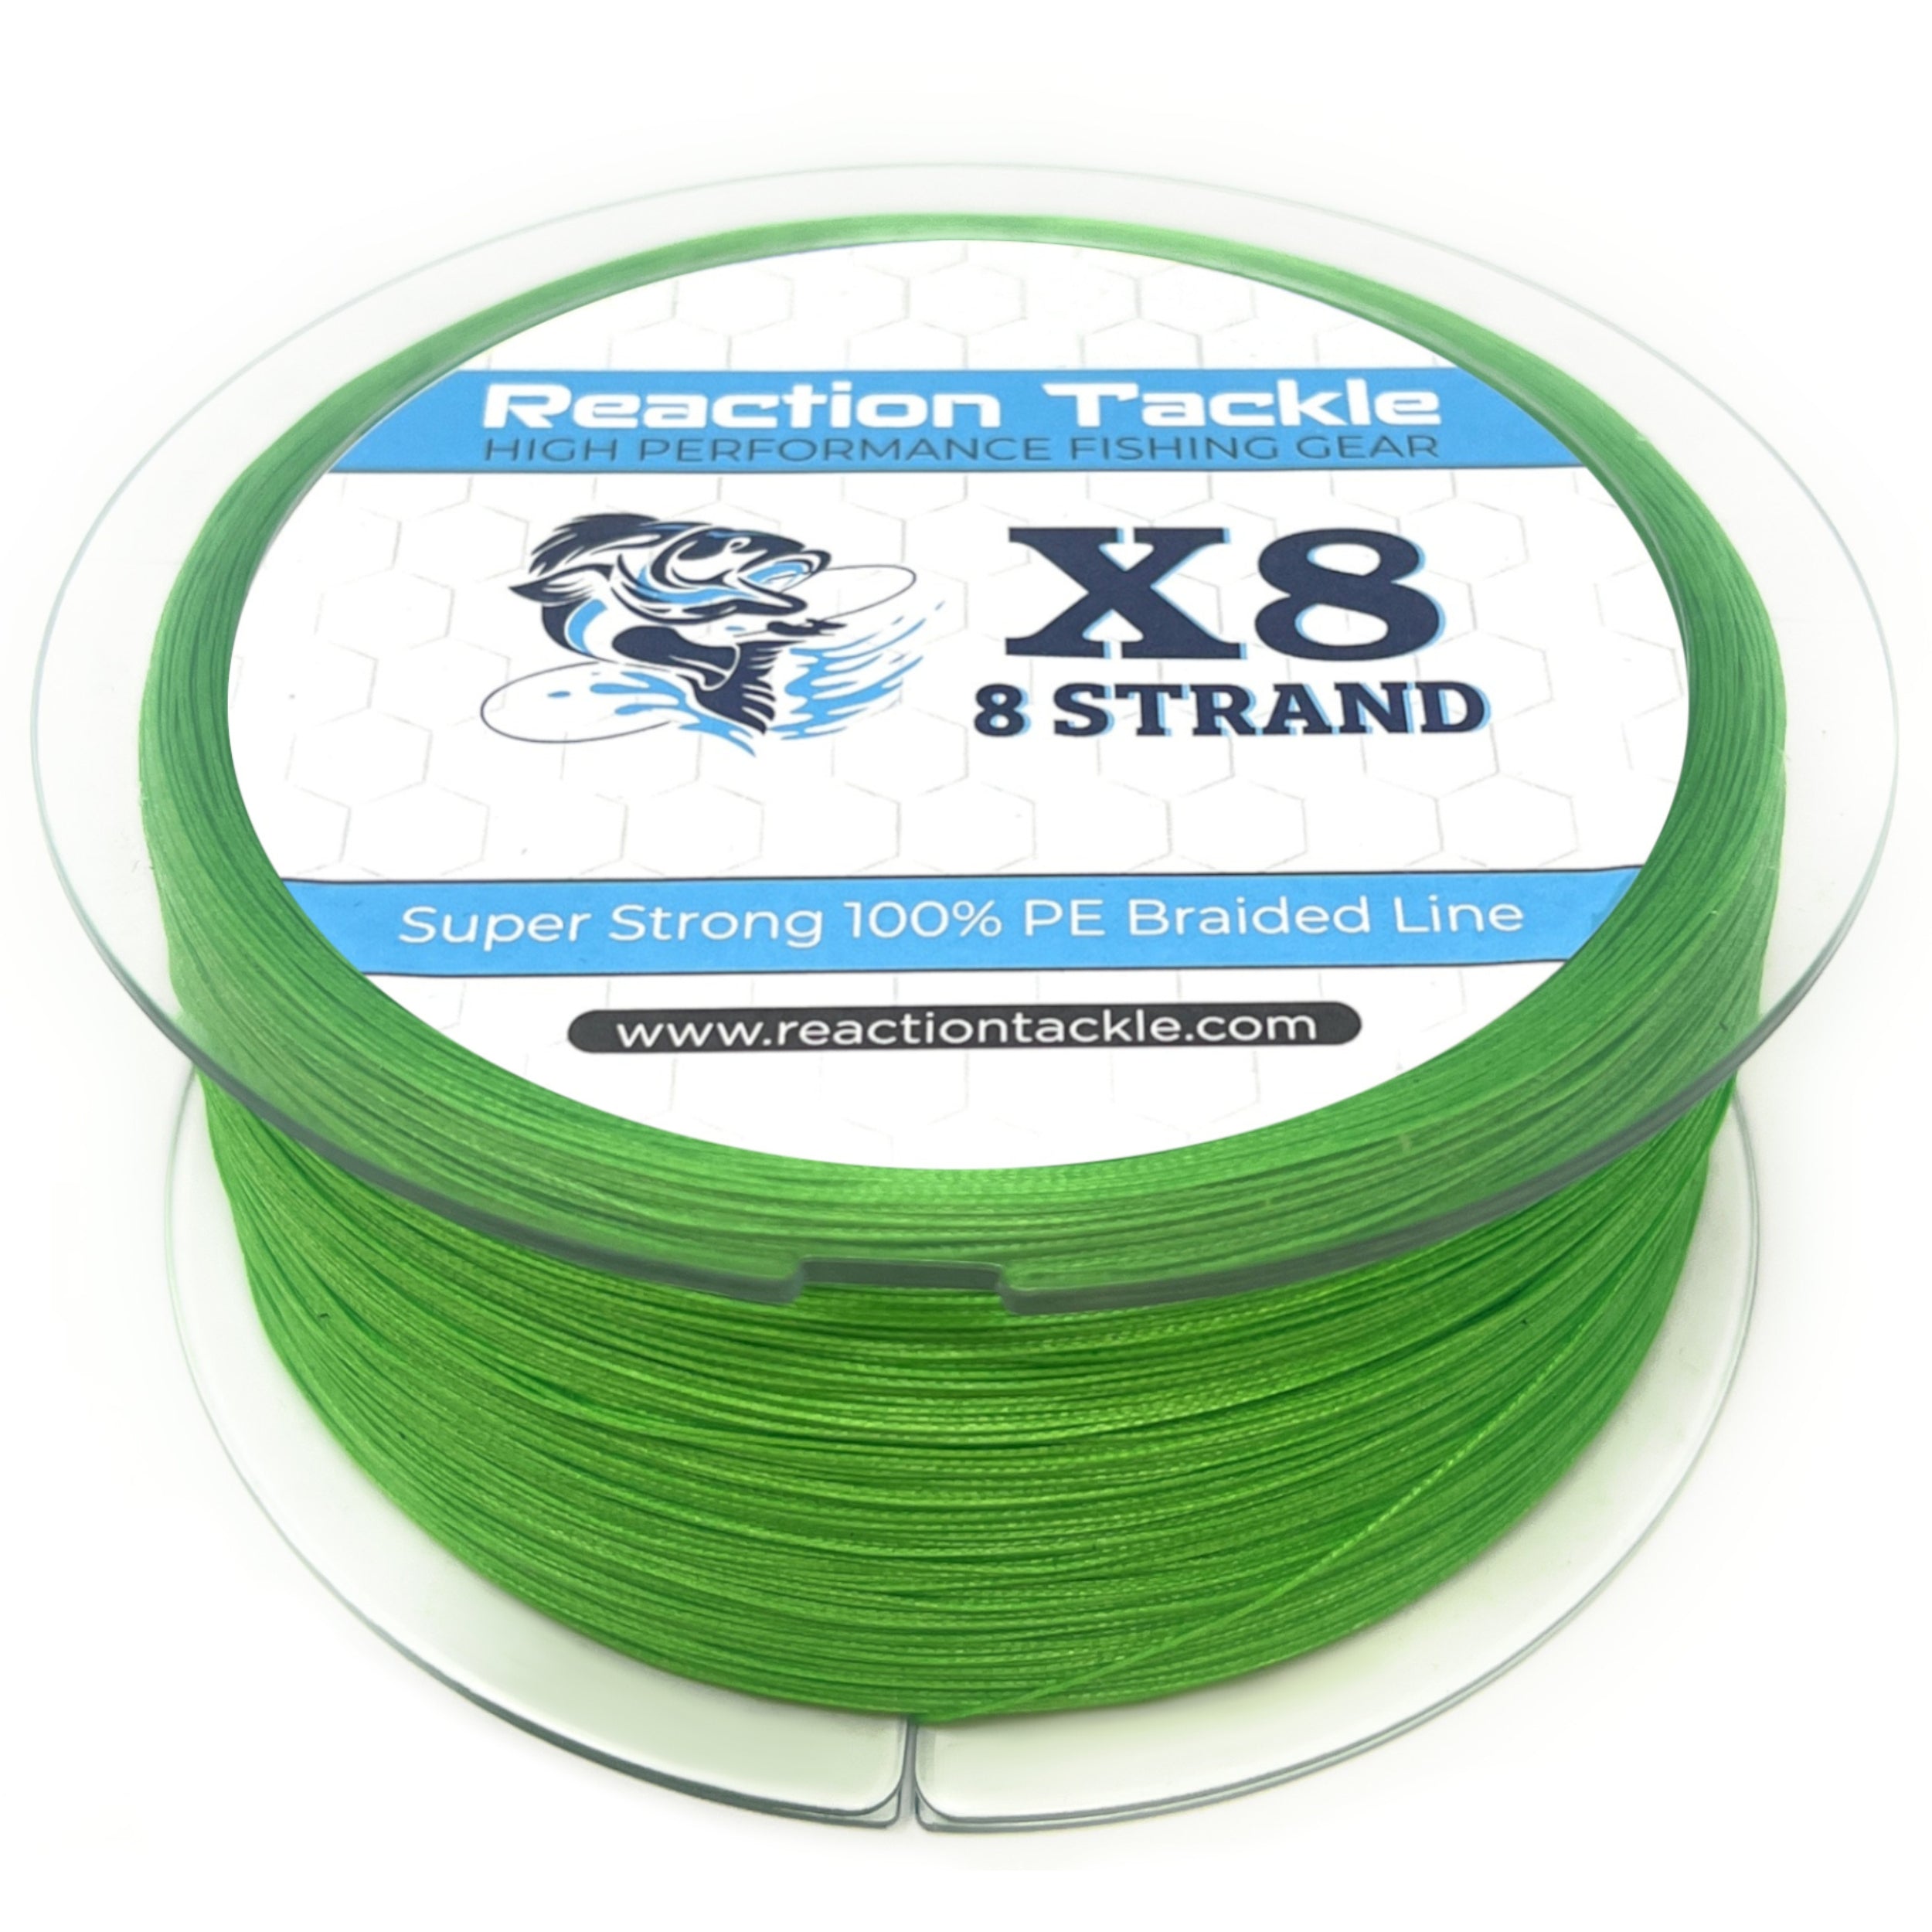 Reaction Tackle Pro Grade 8 Strand Braided Fishing Line Saltwater